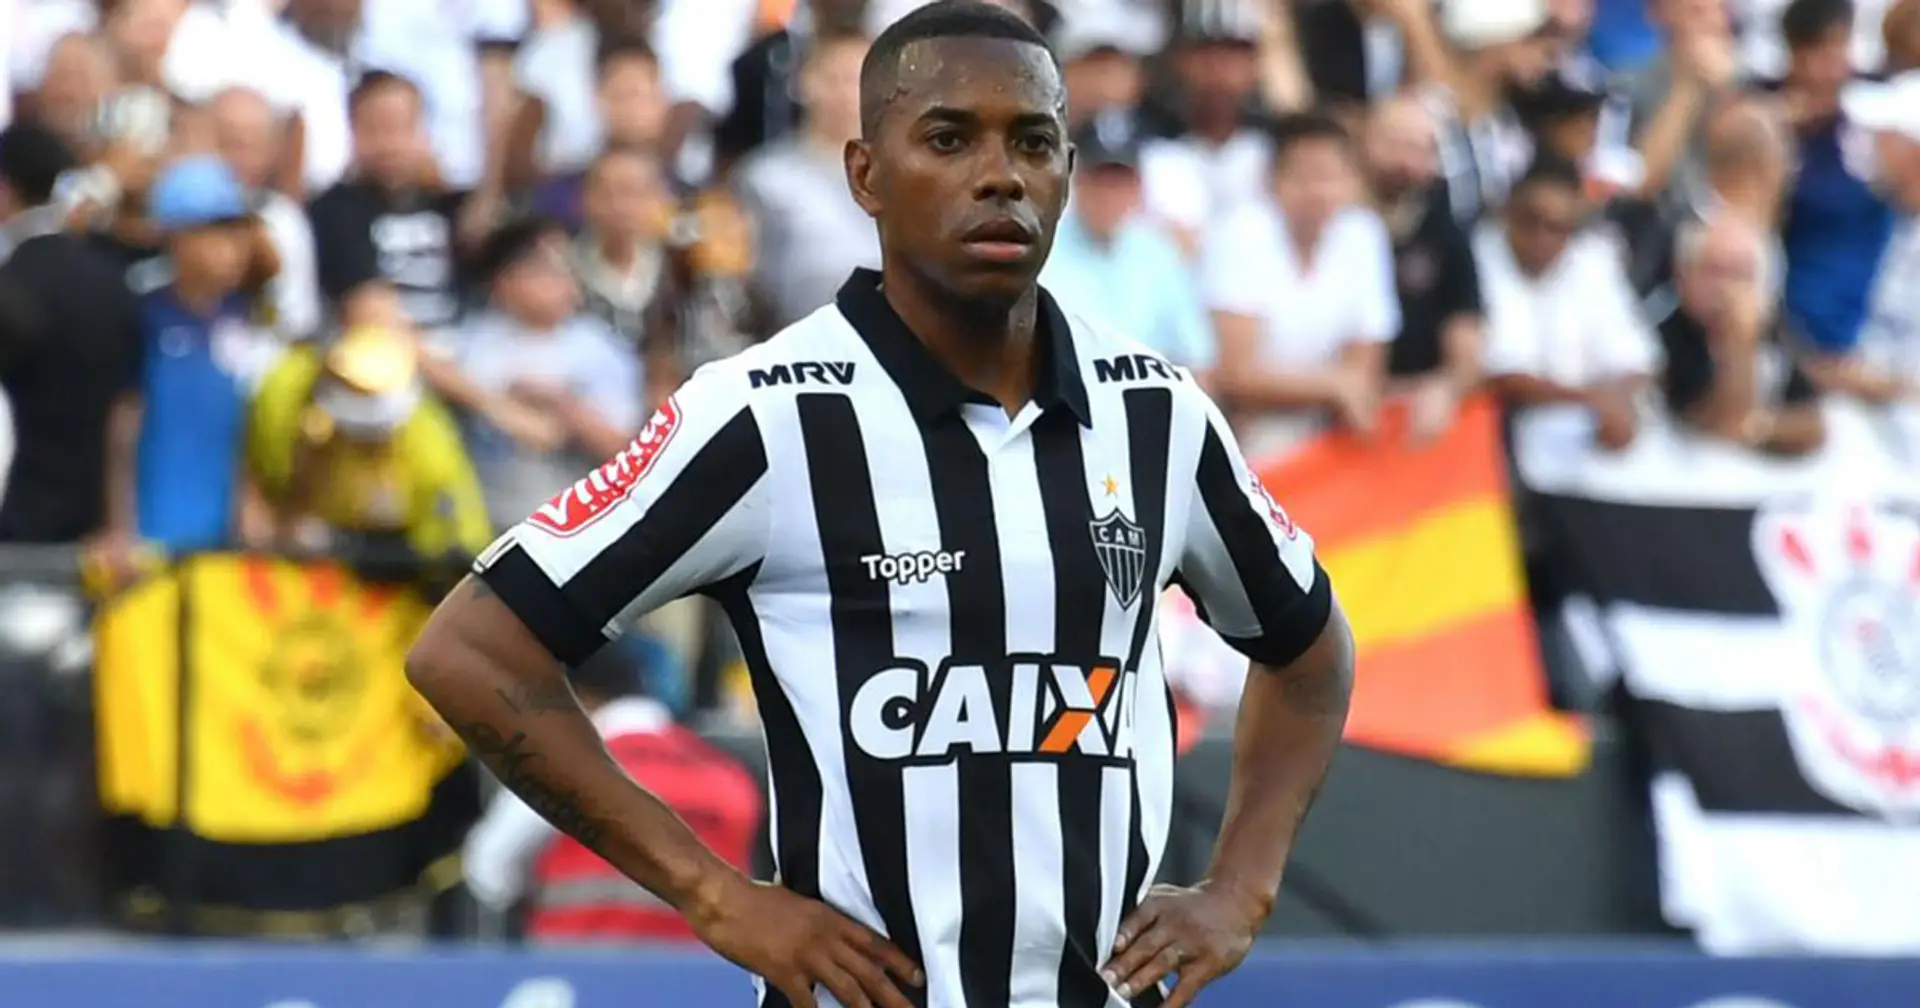 Ex-Real Madrid striker Robinho joins Santos to help boyhood club survive – and gets his deal terminated in 6 days after being accused of rape